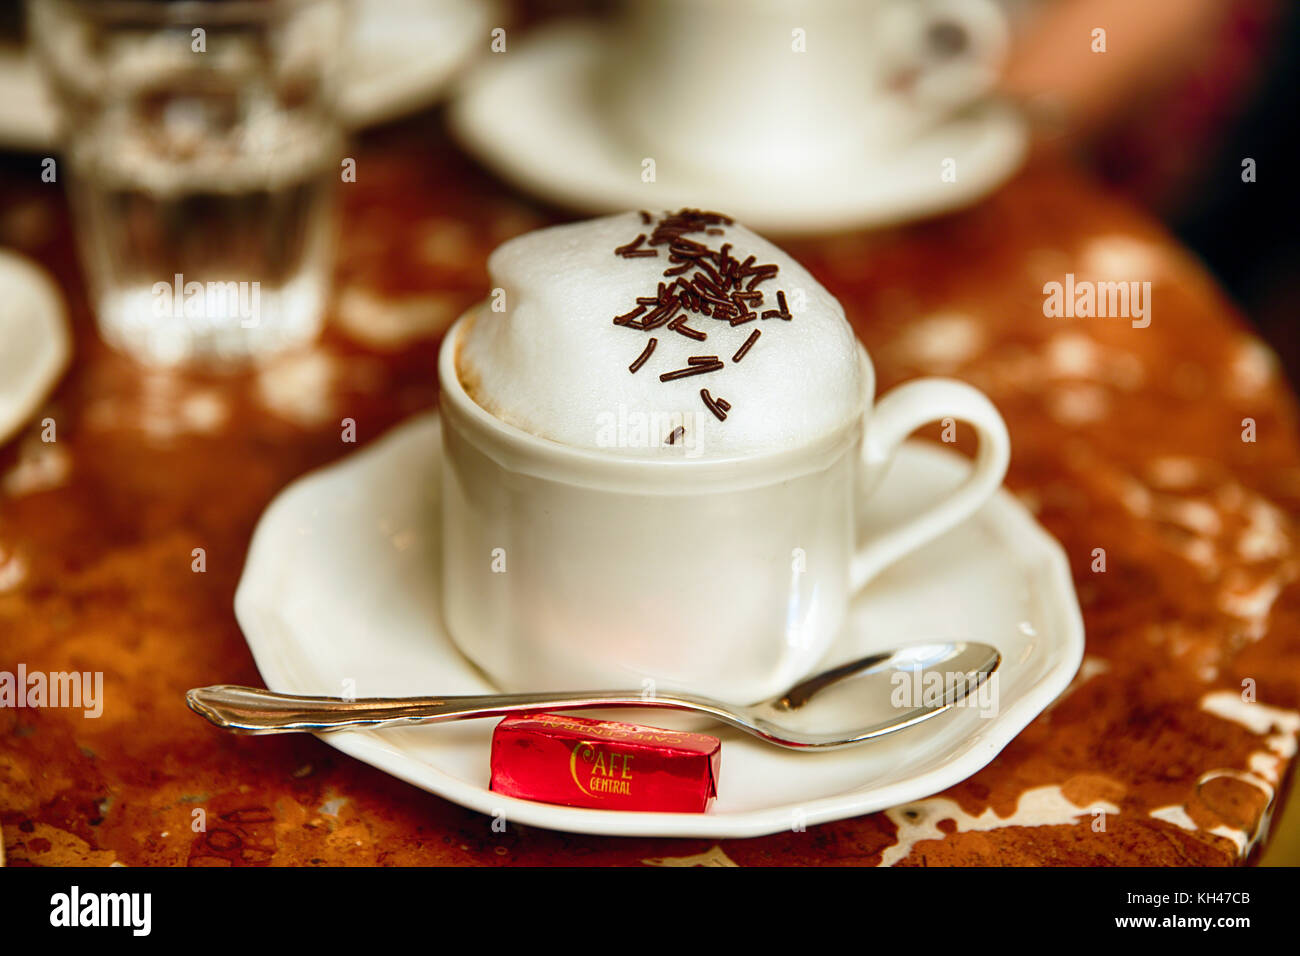 Close Up View of Cup of Cappuccino, Cafe Central, Vienna, Austria Stock Photo